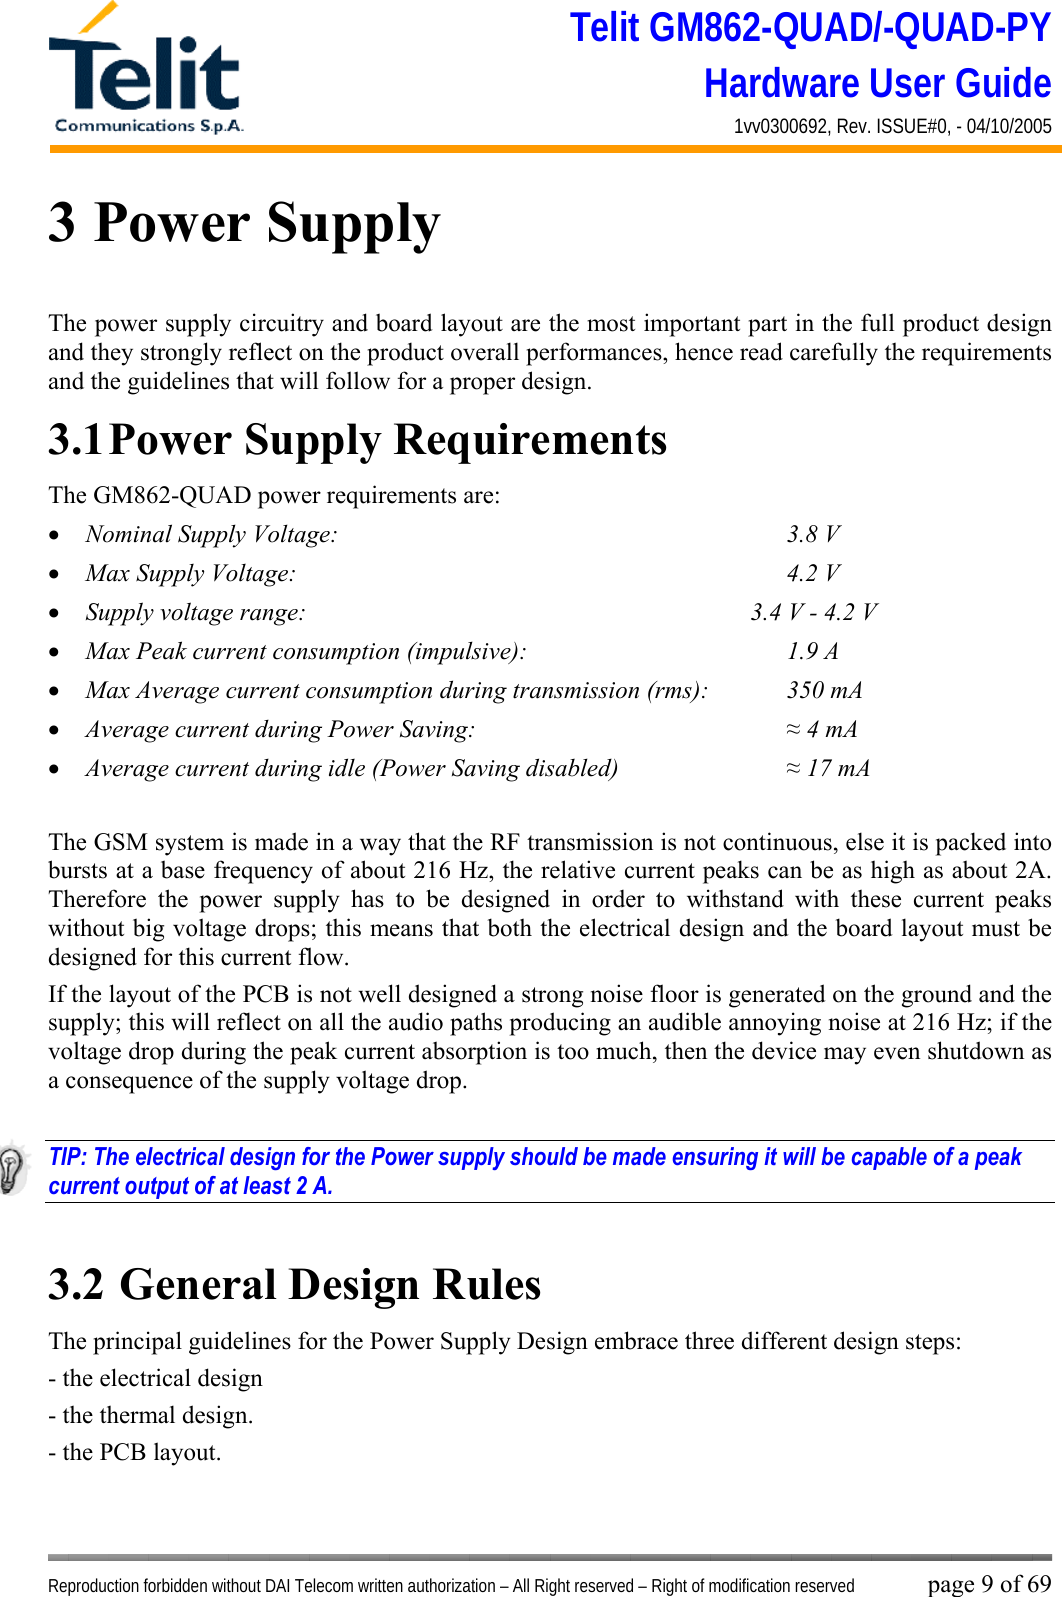 Telit GM862-QUAD/-QUAD-PY Hardware User Guide 1vv0300692, Rev. ISSUE#0, - 04/10/2005   Reproduction forbidden without DAI Telecom written authorization – All Right reserved – Right of modification reserved page 9 of 69 3 Power Supply The power supply circuitry and board layout are the most important part in the full product design and they strongly reflect on the product overall performances, hence read carefully the requirements and the guidelines that will follow for a proper design. 3.1 Power Supply Requirements The GM862-QUAD power requirements are: •  Nominal Supply Voltage:       3.8 V •  Max Supply Voltage:       4.2 V •  Supply voltage range:                  3.4 V - 4.2 V •  Max Peak current consumption (impulsive):         1.9 A •  Max Average current consumption during transmission (rms):   350 mA •  Average current during Power Saving:           ≈ 4 mA •  Average current during idle (Power Saving disabled)      ≈ 17 mA  The GSM system is made in a way that the RF transmission is not continuous, else it is packed into bursts at a base frequency of about 216 Hz, the relative current peaks can be as high as about 2A. Therefore the power supply has to be designed in order to withstand with these current peaks without big voltage drops; this means that both the electrical design and the board layout must be designed for this current flow. If the layout of the PCB is not well designed a strong noise floor is generated on the ground and the supply; this will reflect on all the audio paths producing an audible annoying noise at 216 Hz; if the voltage drop during the peak current absorption is too much, then the device may even shutdown as a consequence of the supply voltage drop.  TIP: The electrical design for the Power supply should be made ensuring it will be capable of a peak current output of at least 2 A.  3.2  General Design Rules The principal guidelines for the Power Supply Design embrace three different design steps: - the electrical design - the thermal design. - the PCB layout.  